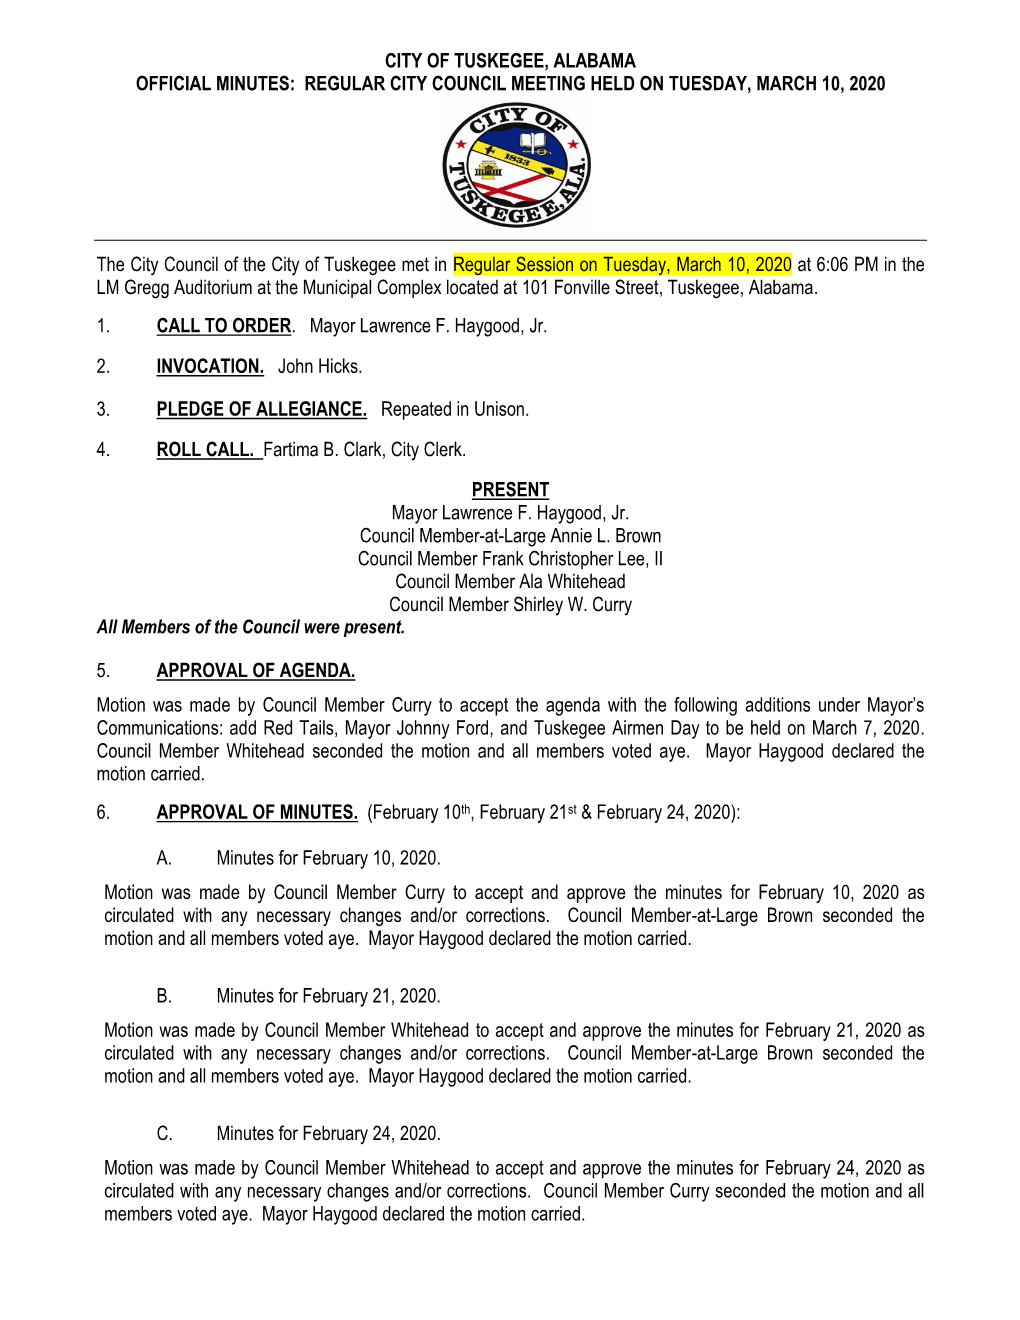 City of Tuskegee, Alabama Official Minutes: Regular City Council Meeting Held on Tuesday, March 10, 2020